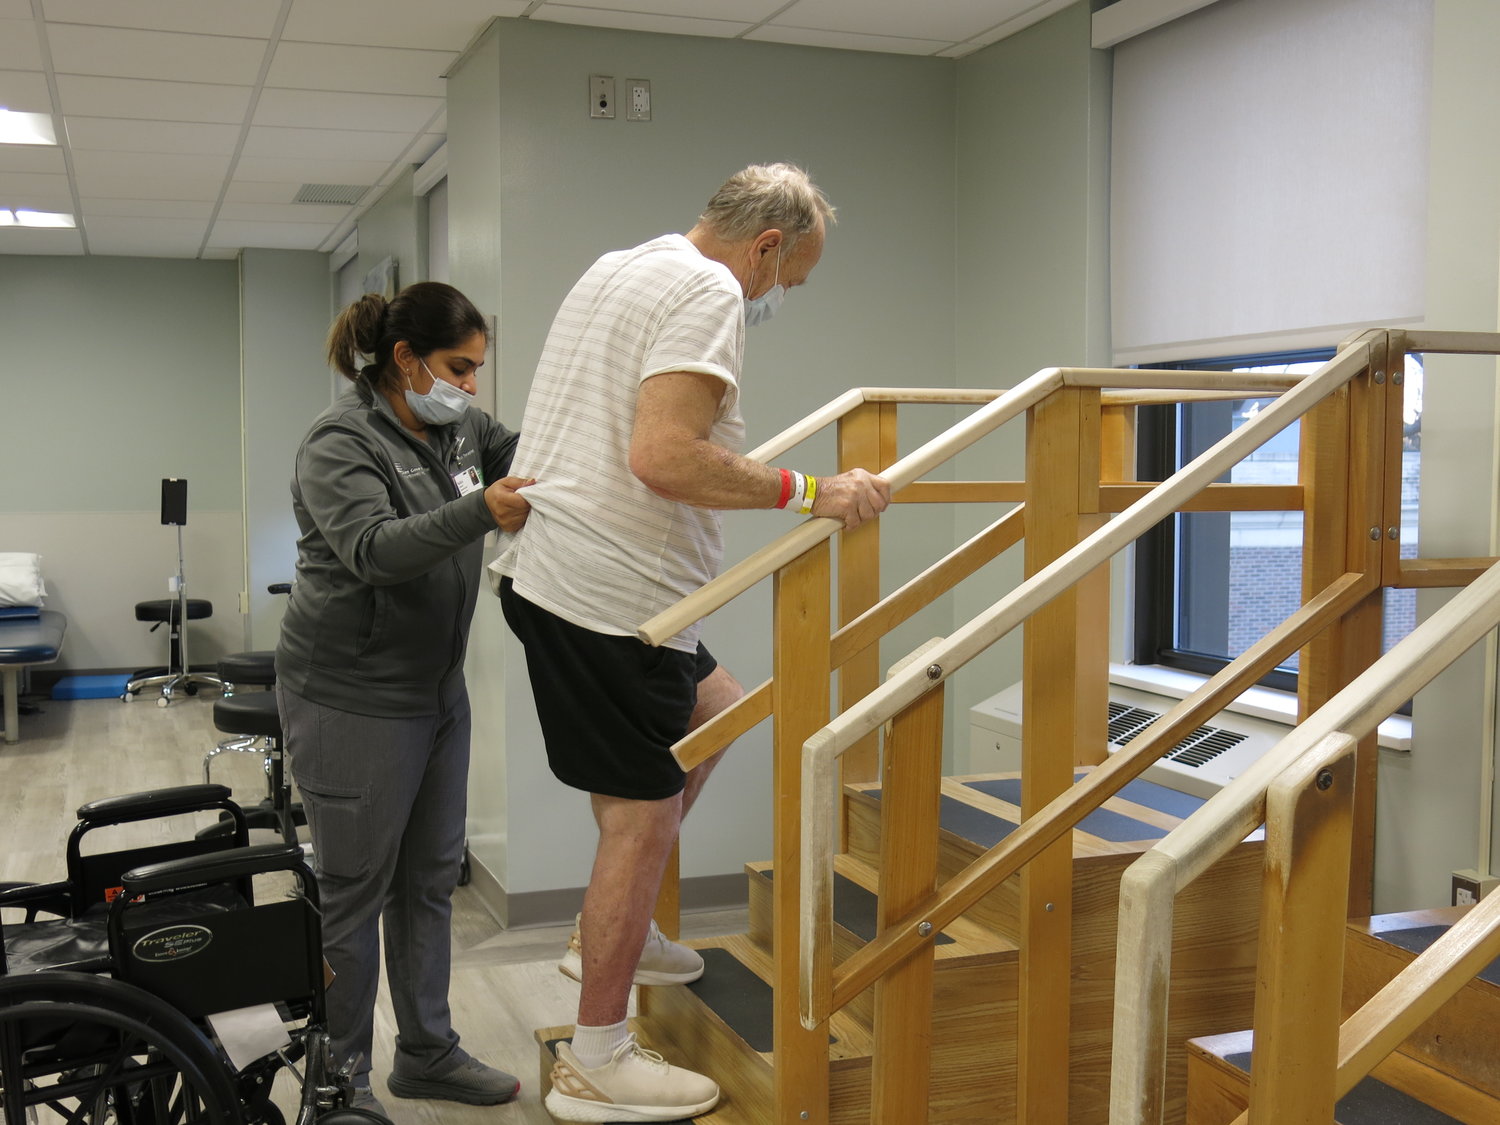 Glen Cove Hospital physical therapist Rabia Hassan worked with a patient in the physical therapy room of the new rehab center on the third floor of the hospital.